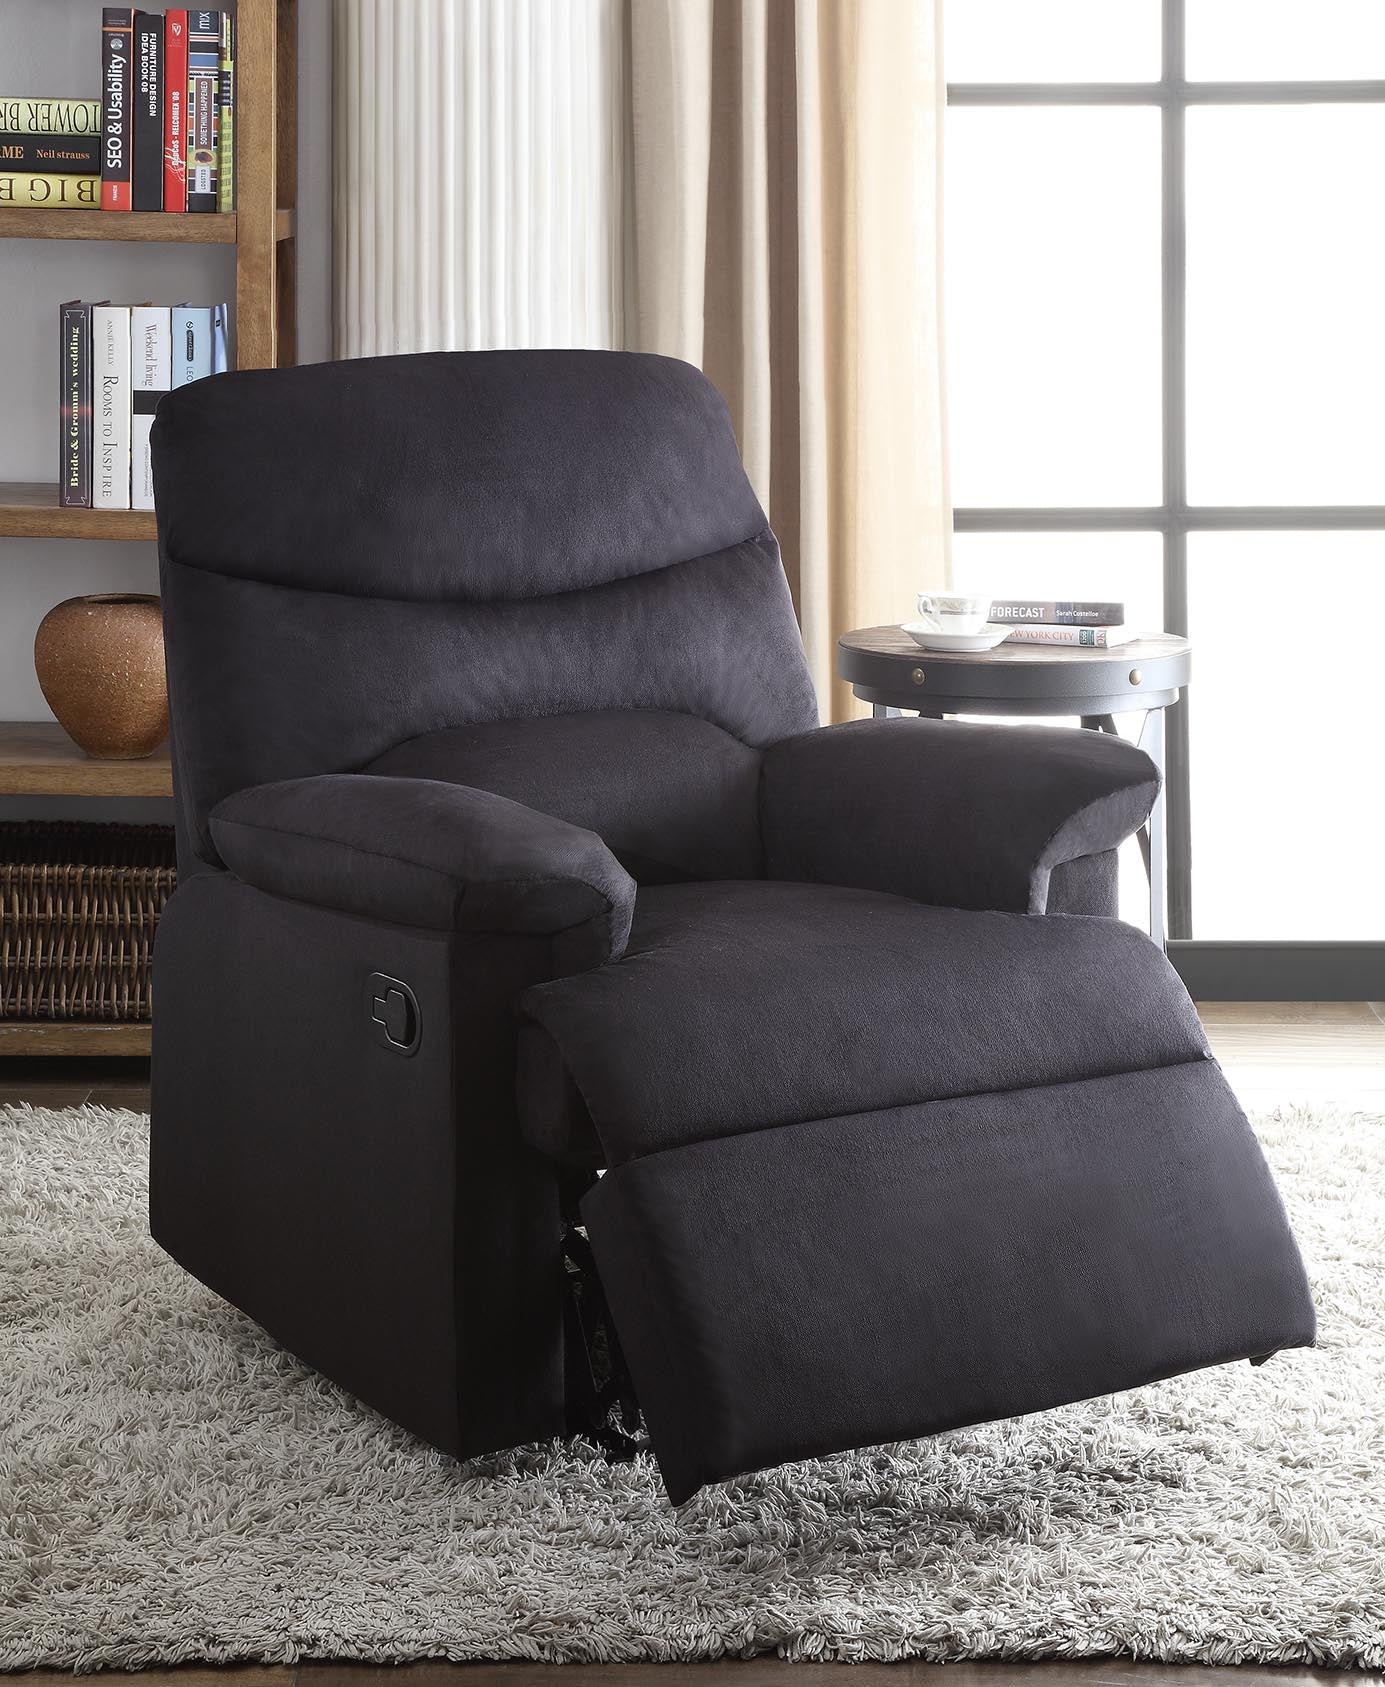 Recliner , Black Woven Fabric - Woven Fabric, Wood (Solid Black Woven Fabric